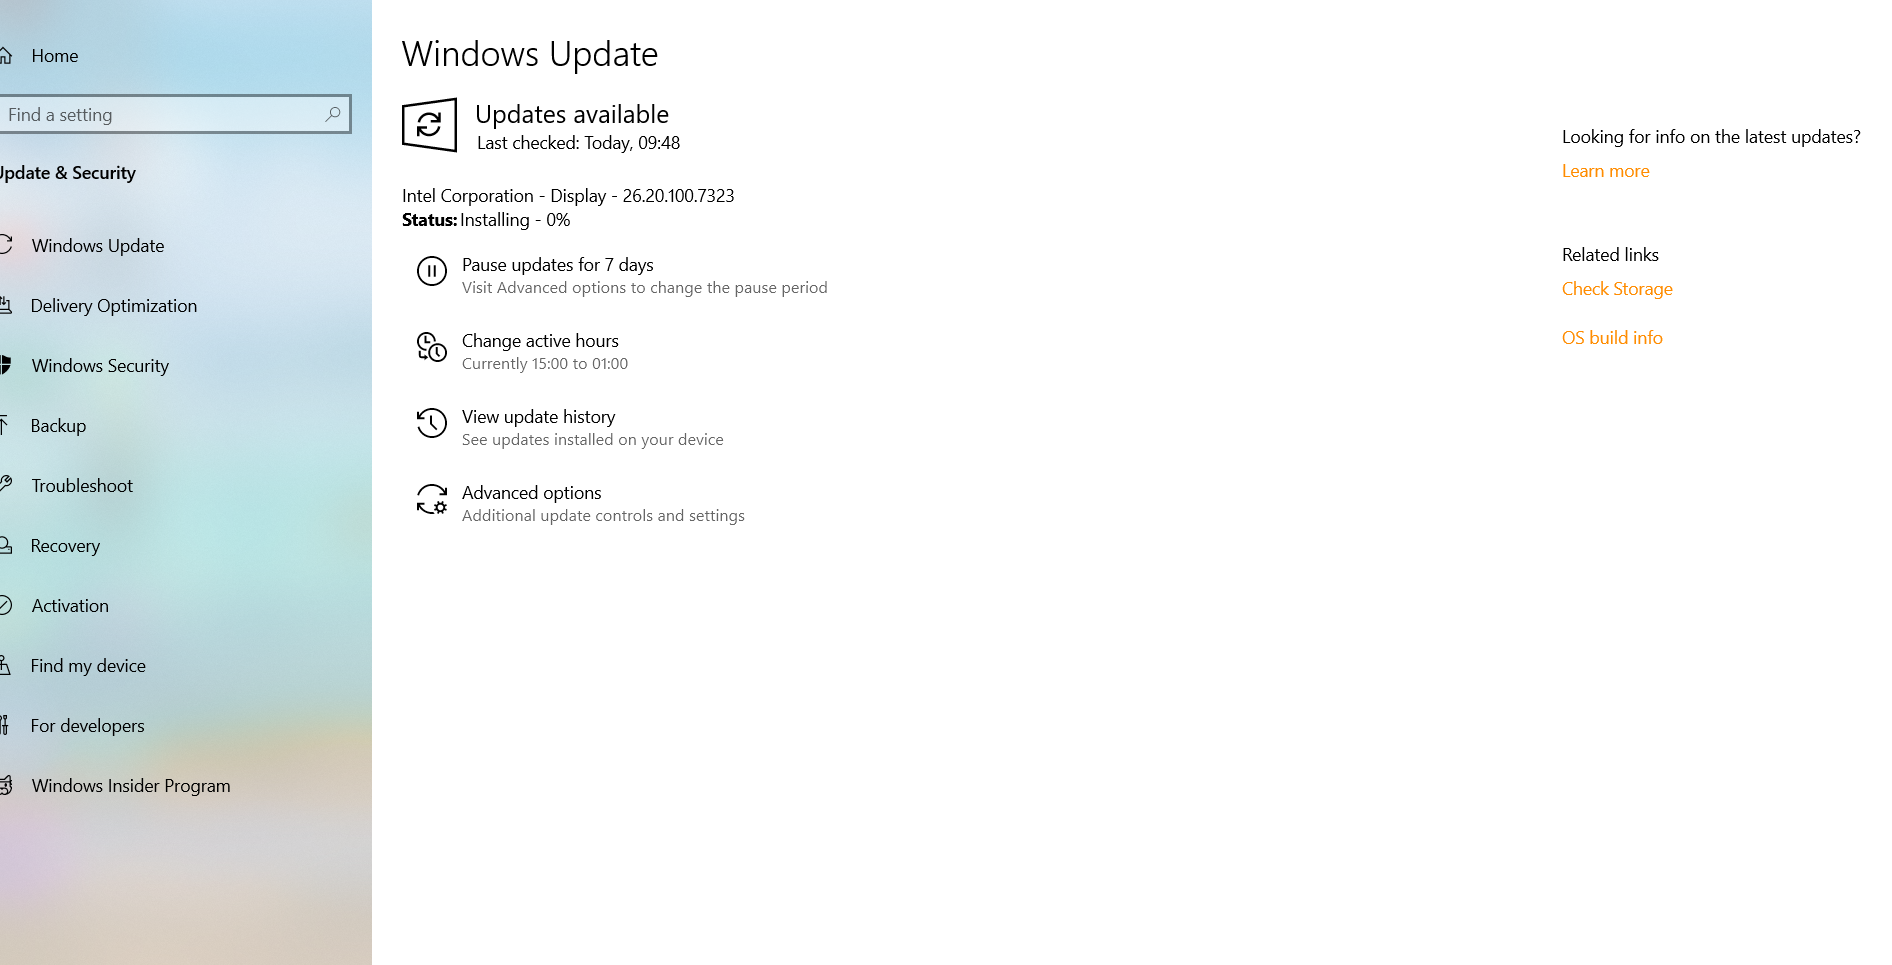 Windows Update tries to install an already installed update 80ba7d24-ab4e-4eec-9714-8444071870f9?upload=true.png